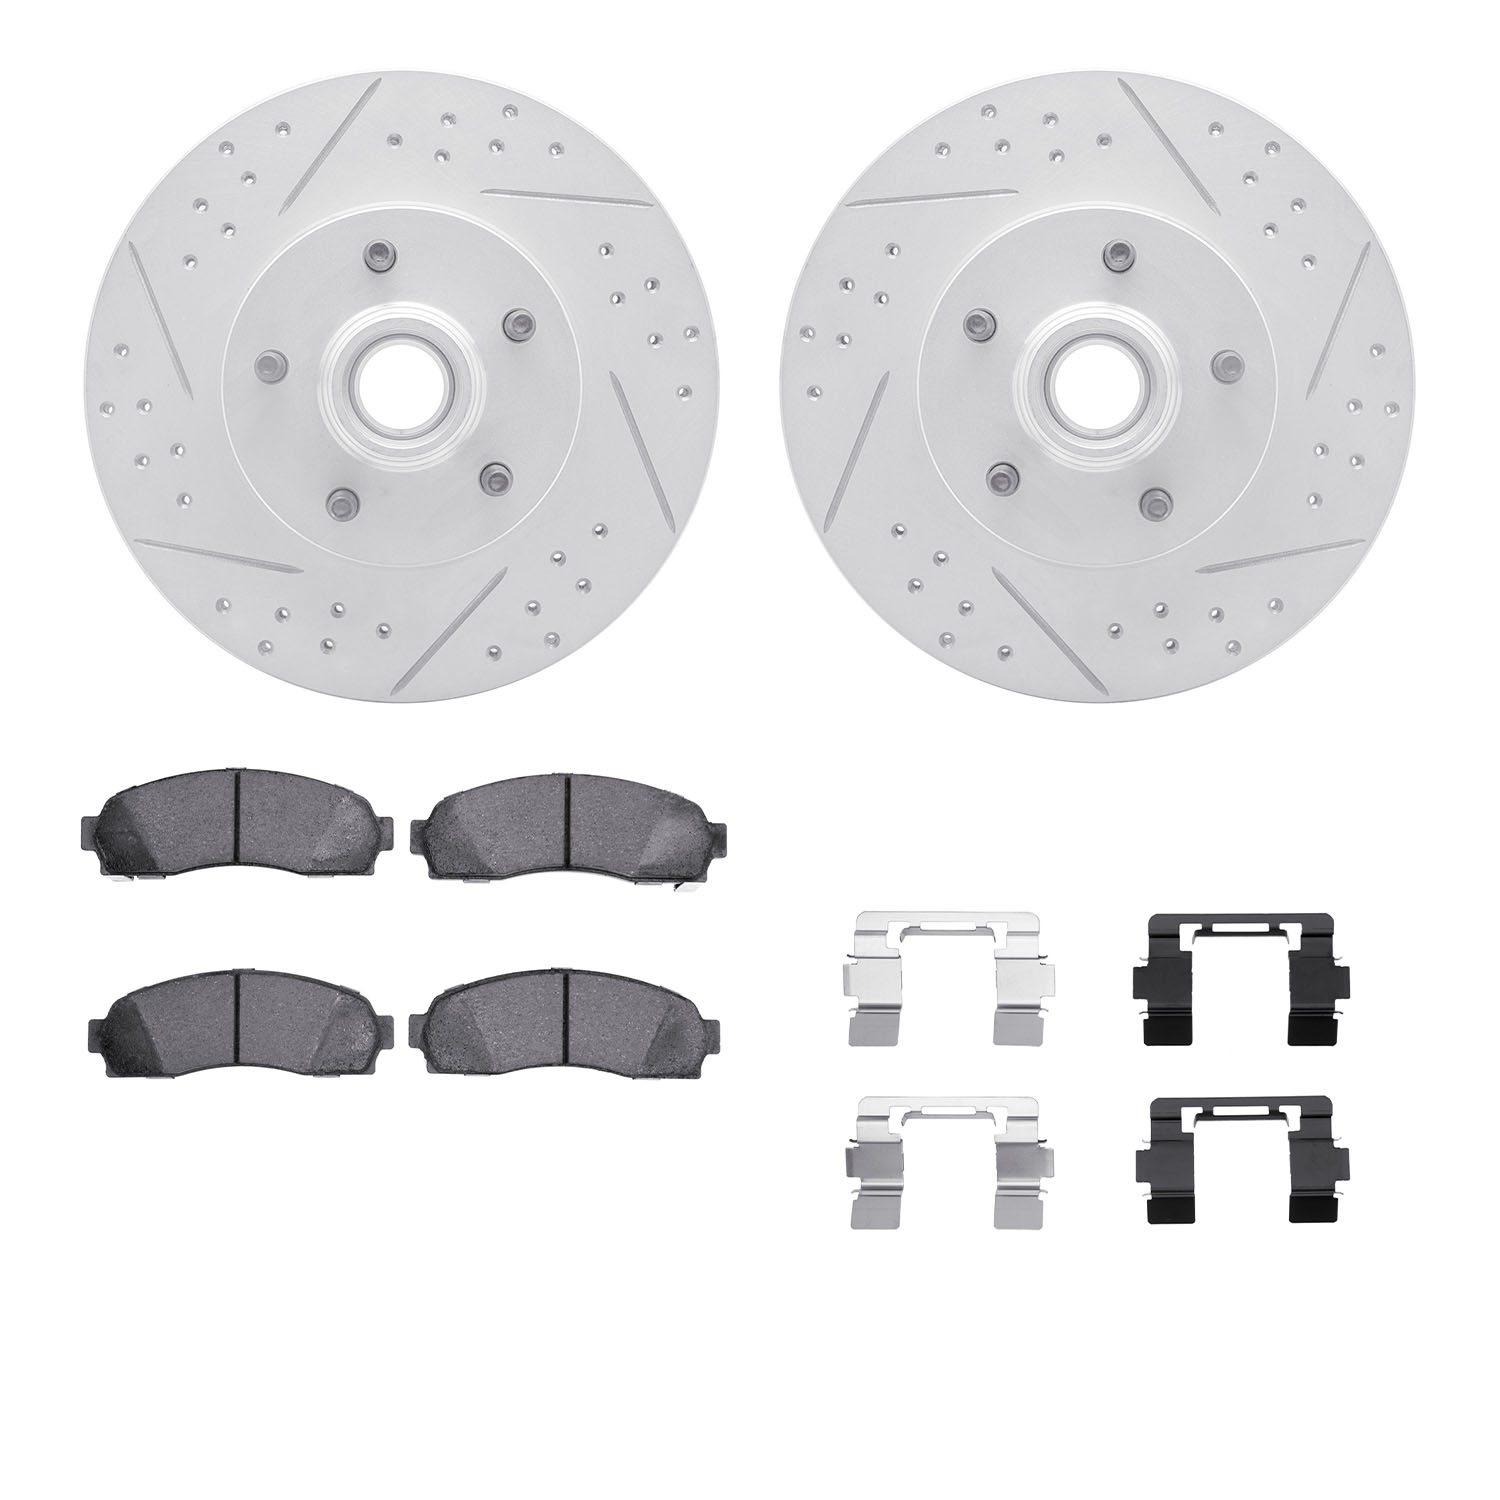 2212-99086 Geoperformance Drilled/Slotted Rotors w/Heavy-Duty Pads Kit & Hardware, 2003-2011 Ford/Lincoln/Mercury/Mazda, Positio